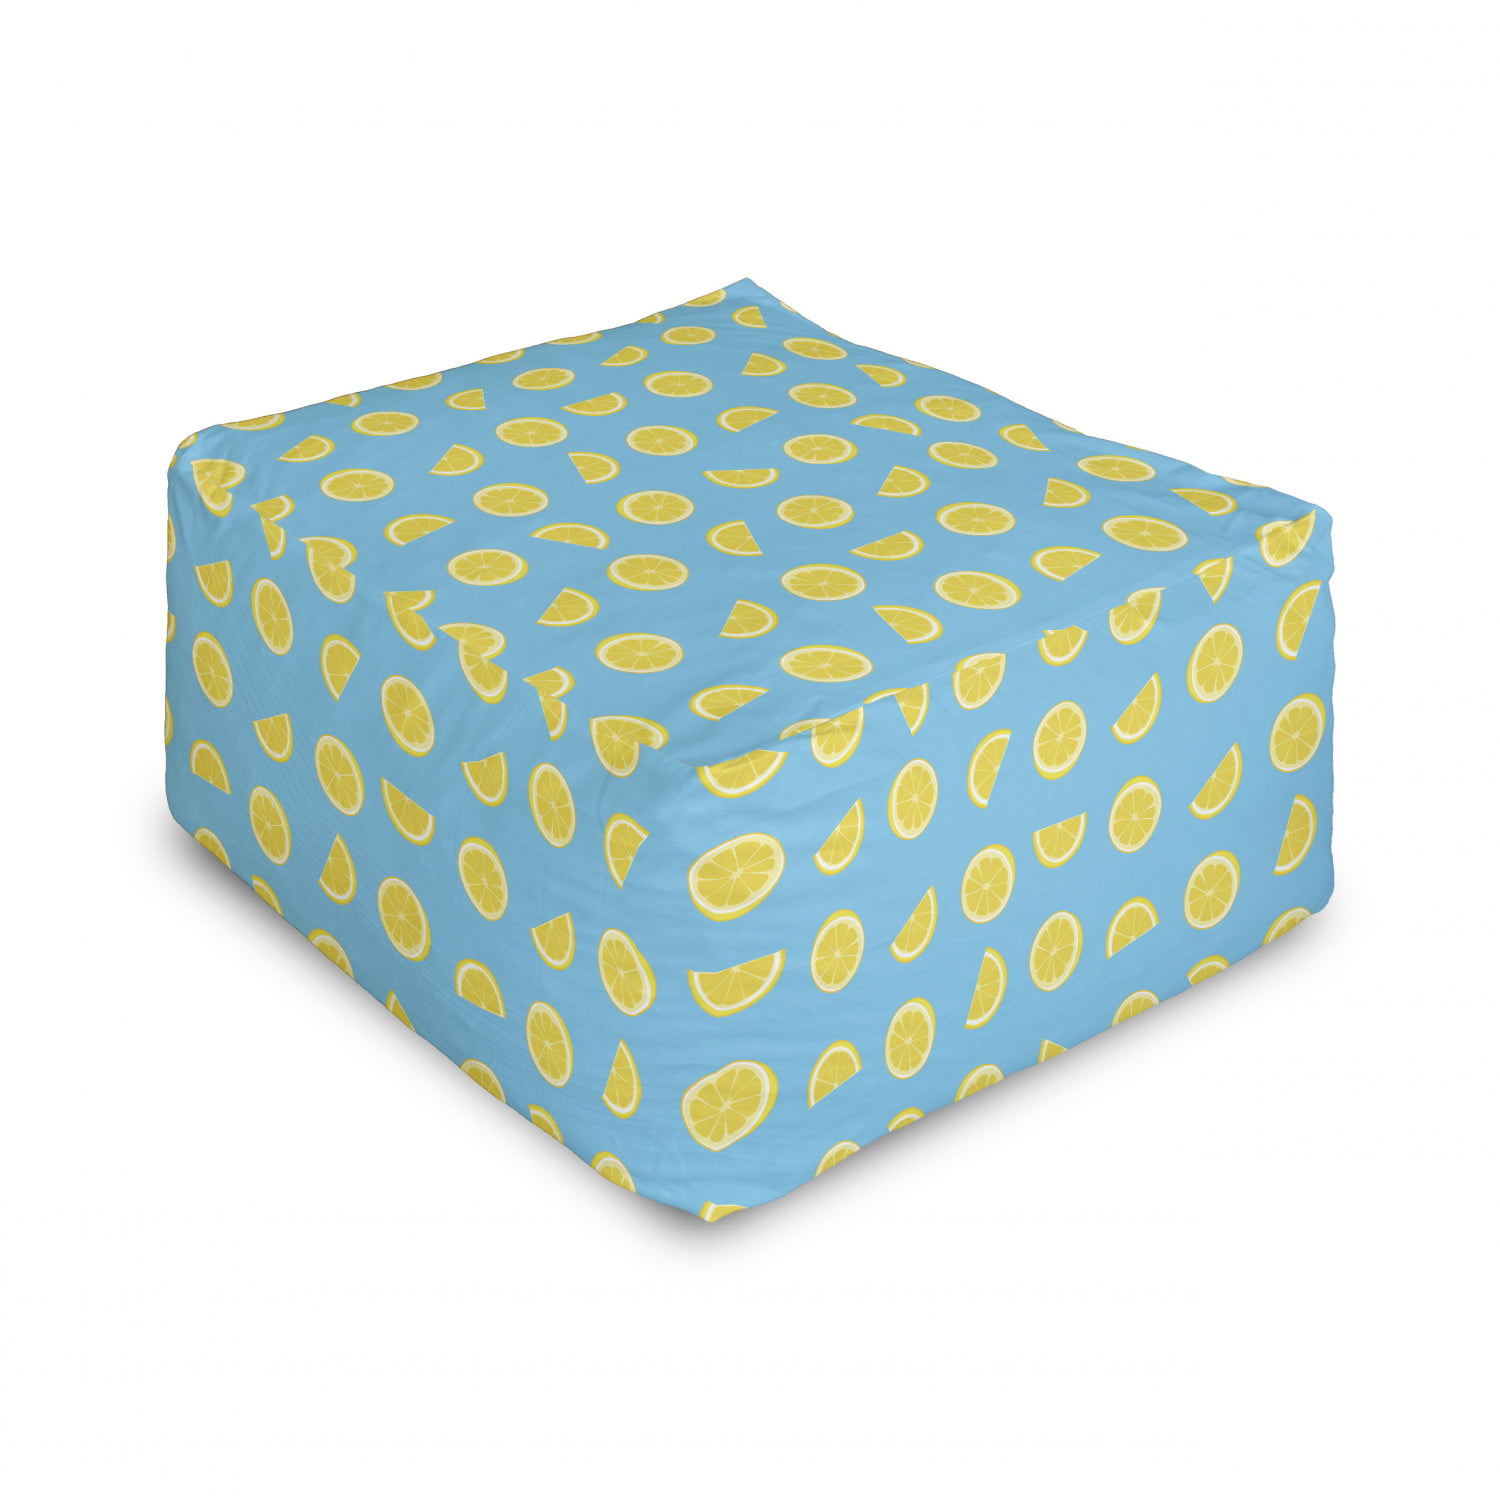 Under Desk Foot Stool for Living Room Office Ottoman with Cover 25 Lemon Flavor Ice Cream with Face Glasses and Mustache Fun Humor Graphic Ambesonne Yellow and Blue Rectangle Pouf Teal Yellow 